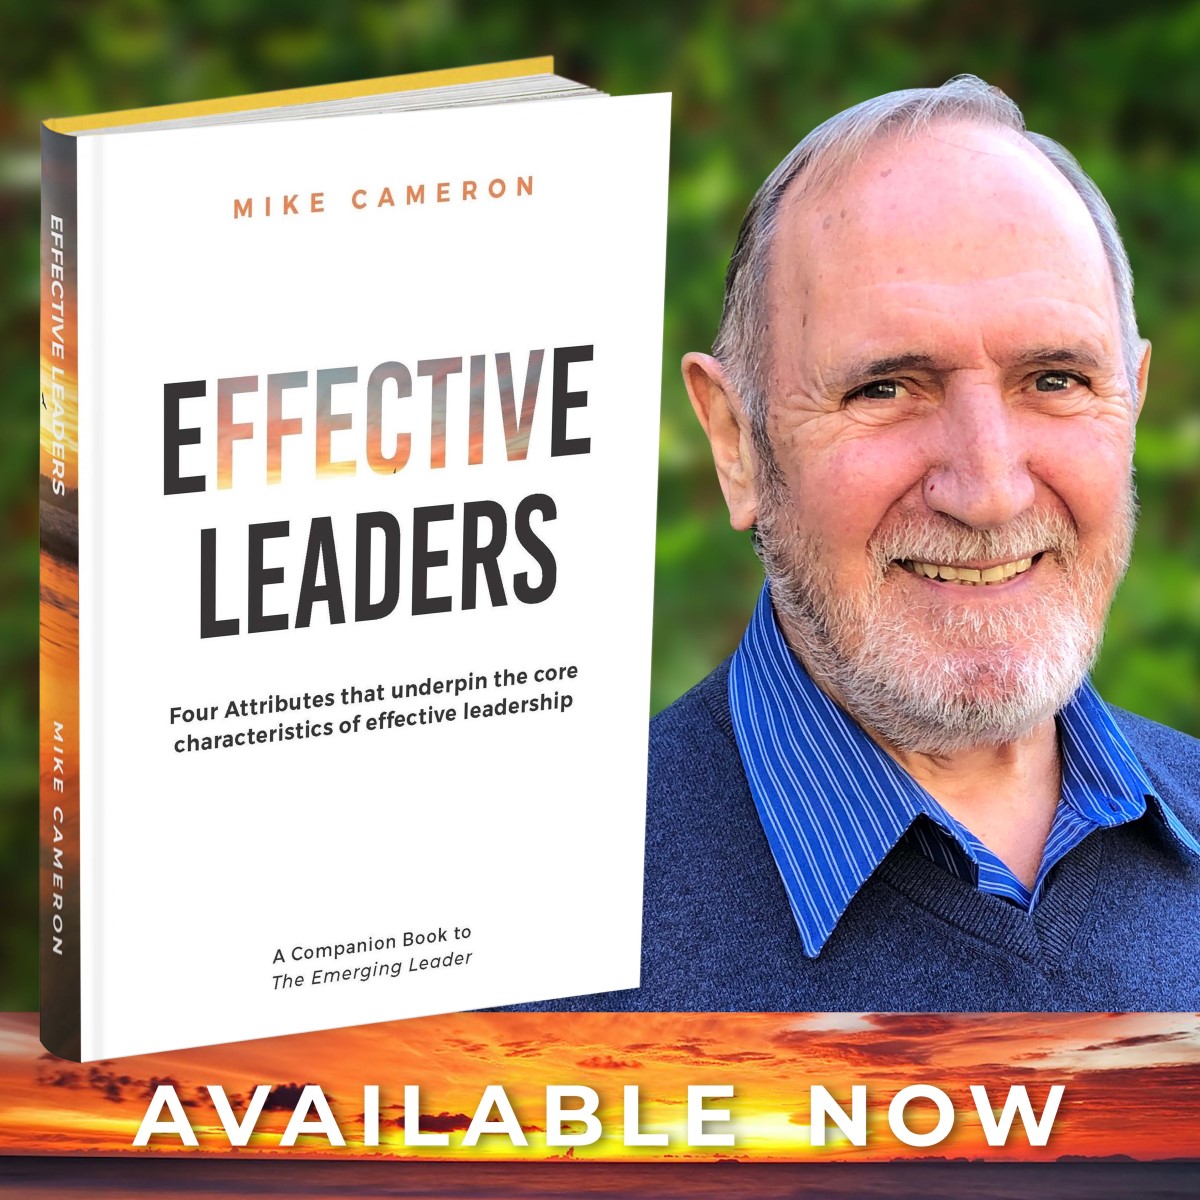 Effective Leaders book by Mike Cameron